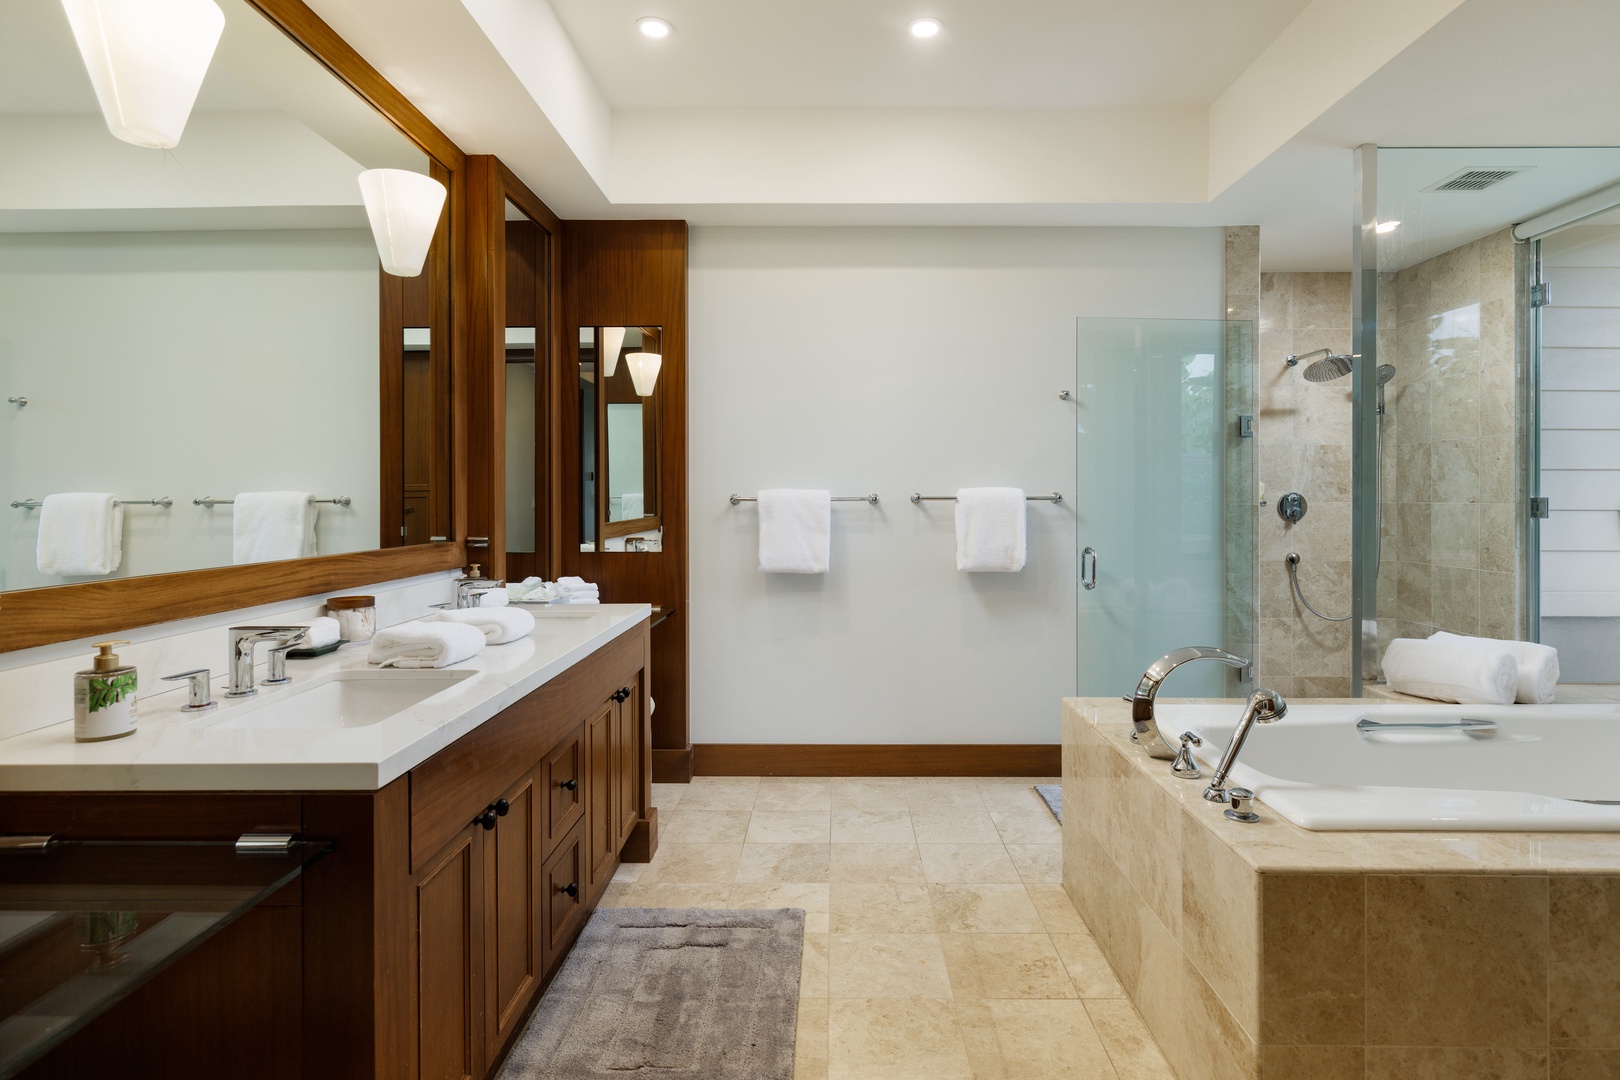 Kailua Kona Vacation Rentals, Fairway Villa 104A - Wide and roomy ensuite with dual vanity spaces.